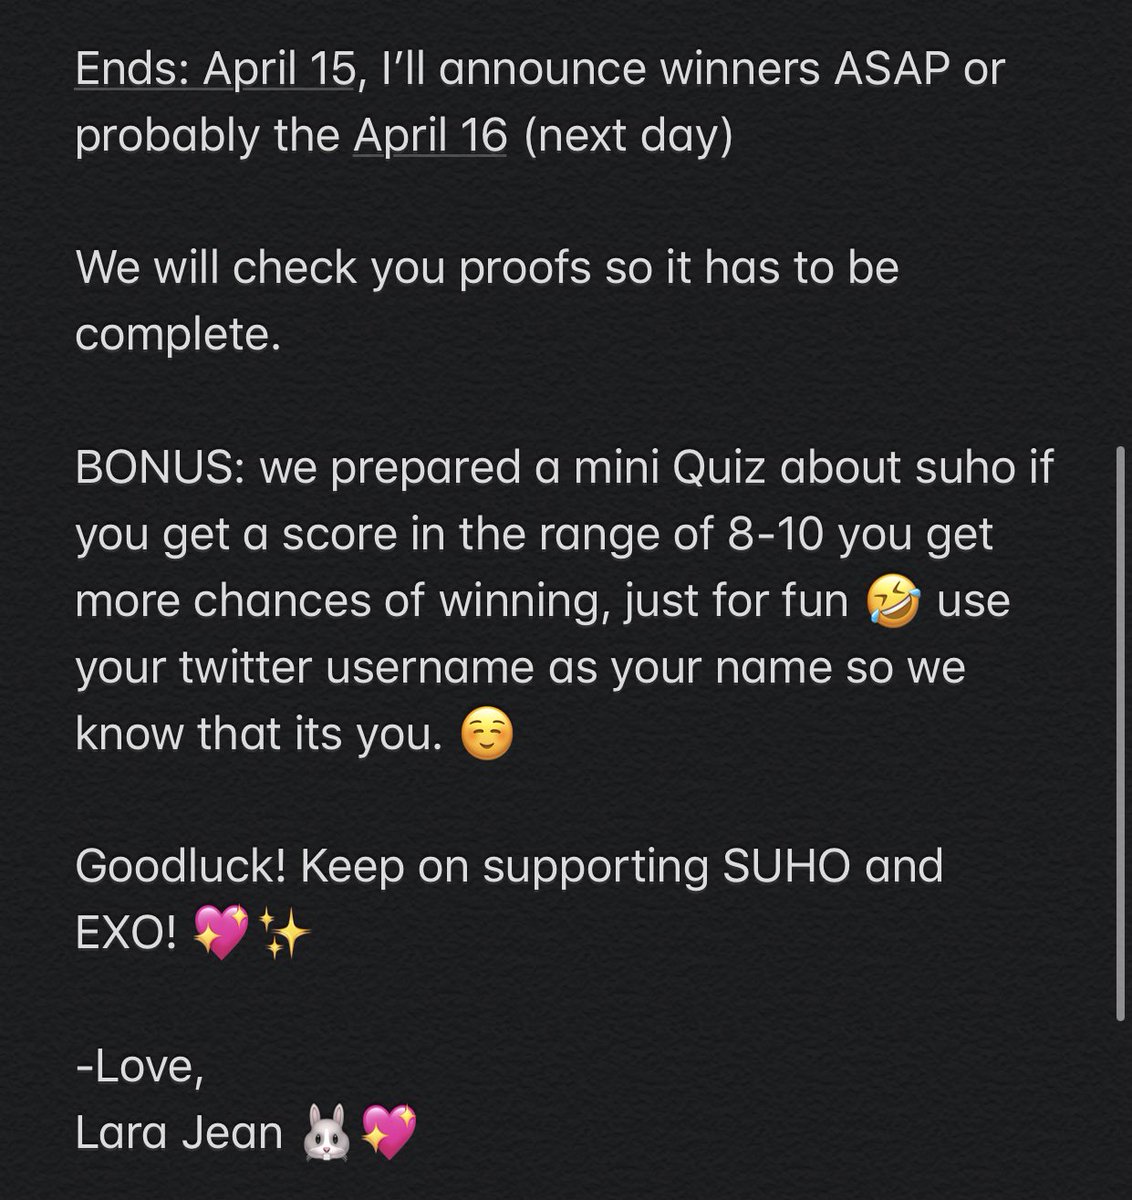 SUHO’S DEBUT SUCCESS GIVEAWAY~Please read everything carefully! ~Please be respectful and rest assured we will be fair in choosing the winner  ~Mini Quiz:  http://www.quizyourfriends.com/take-quiz.php?id=2004010049306559&cpy&Goodluck Guys!   @weareoneEXO  #SUHO    #EXO  #Self_Portrait    #Lets_Love_With_Suho